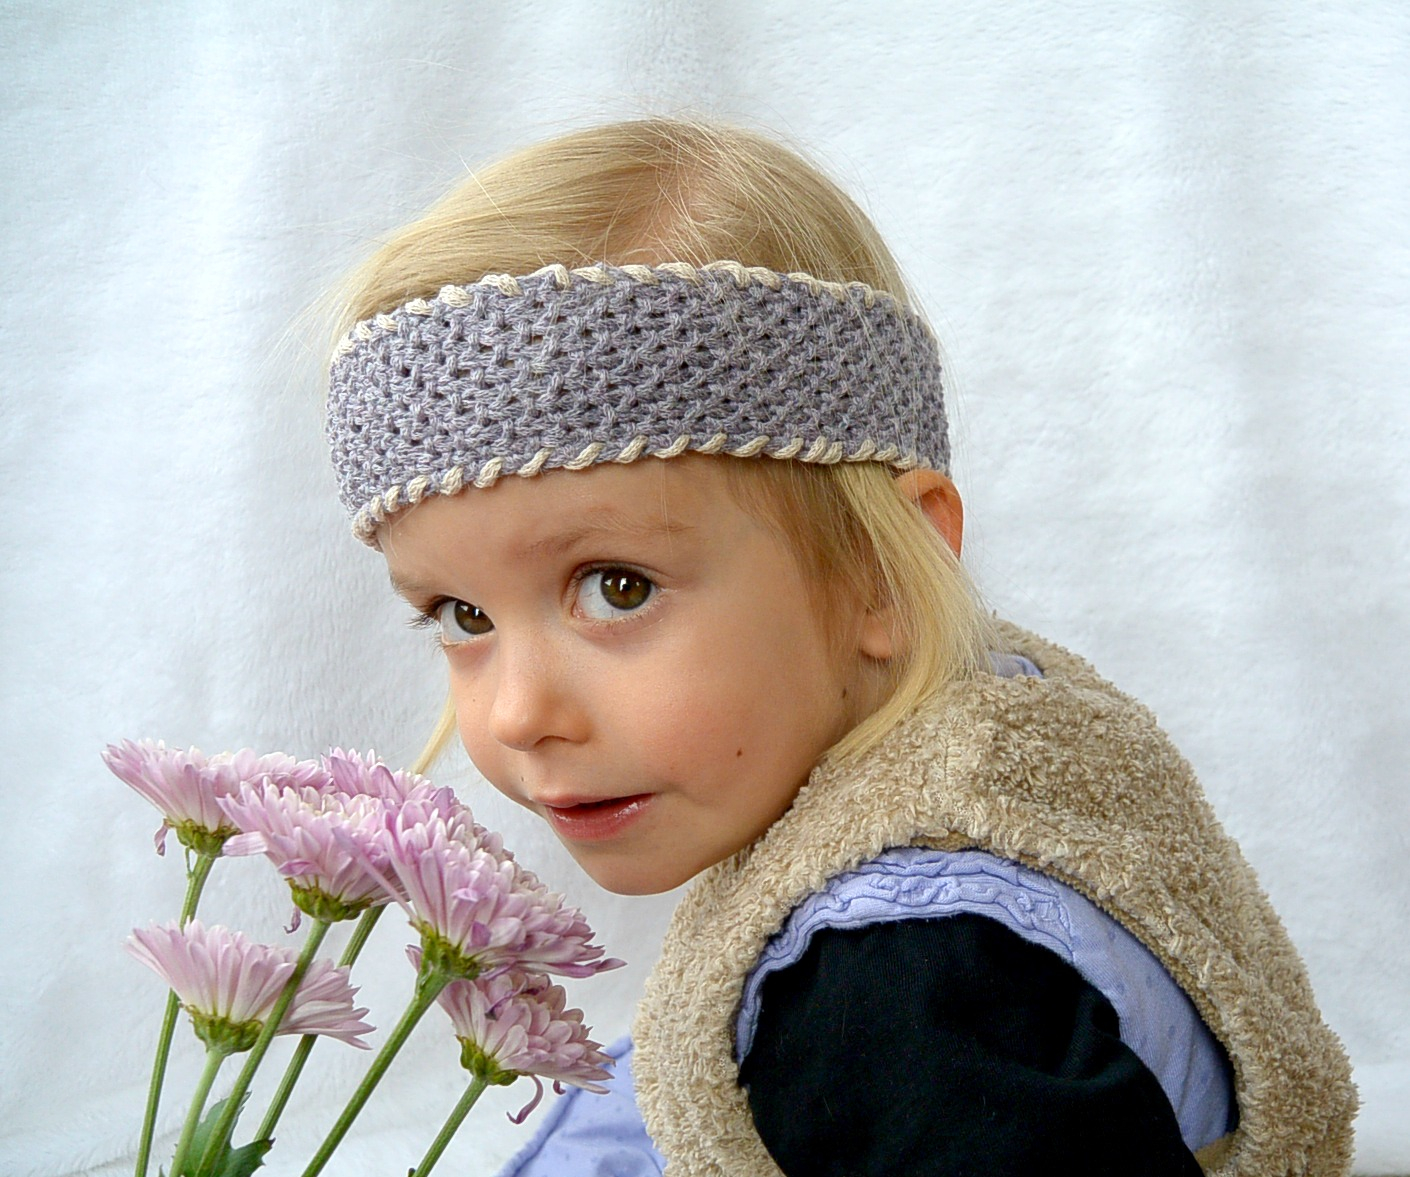 Knitted Headband Patterns With Flower Easy Seed Stitch Headband Adult Or Child Mama In A Stitch